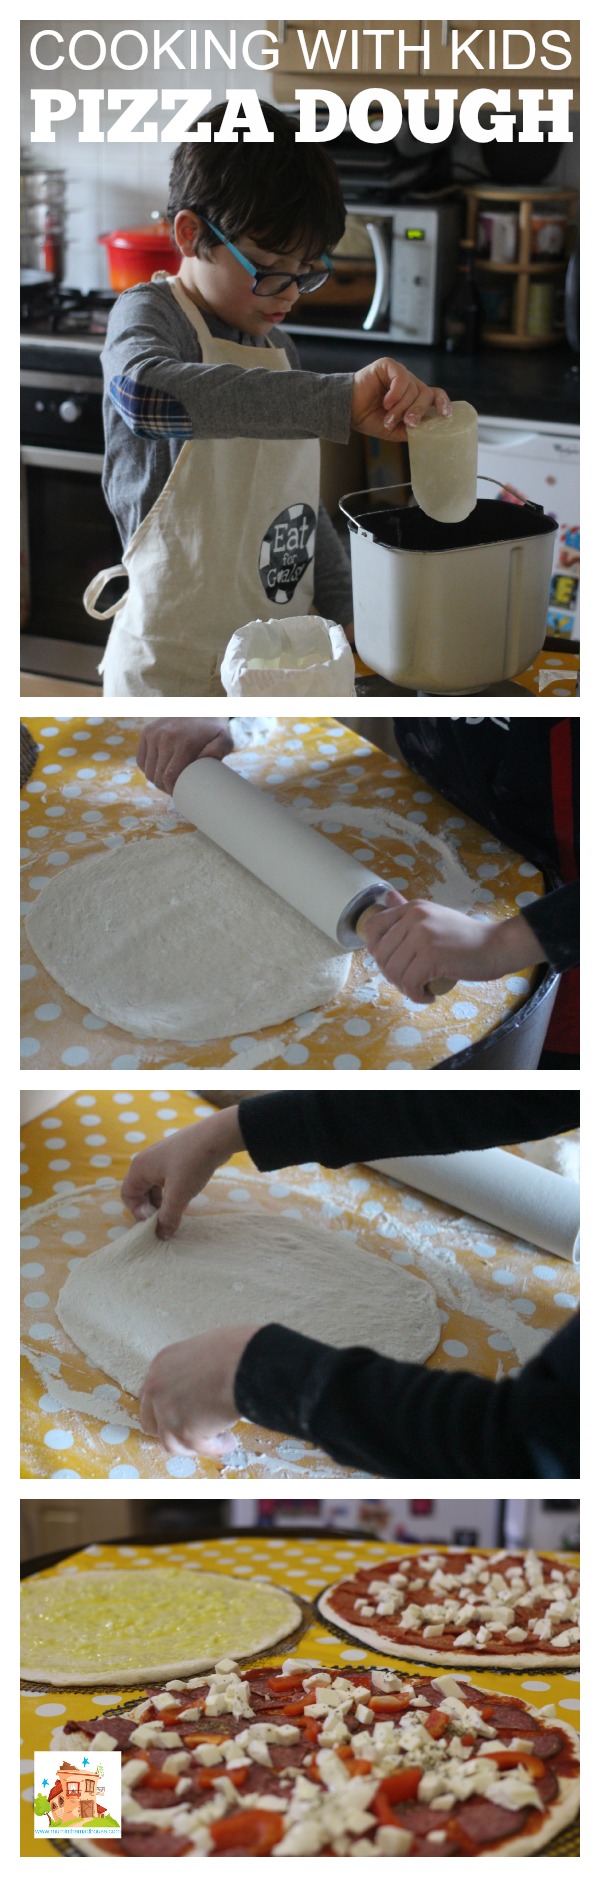 pizza dough cooking with kids